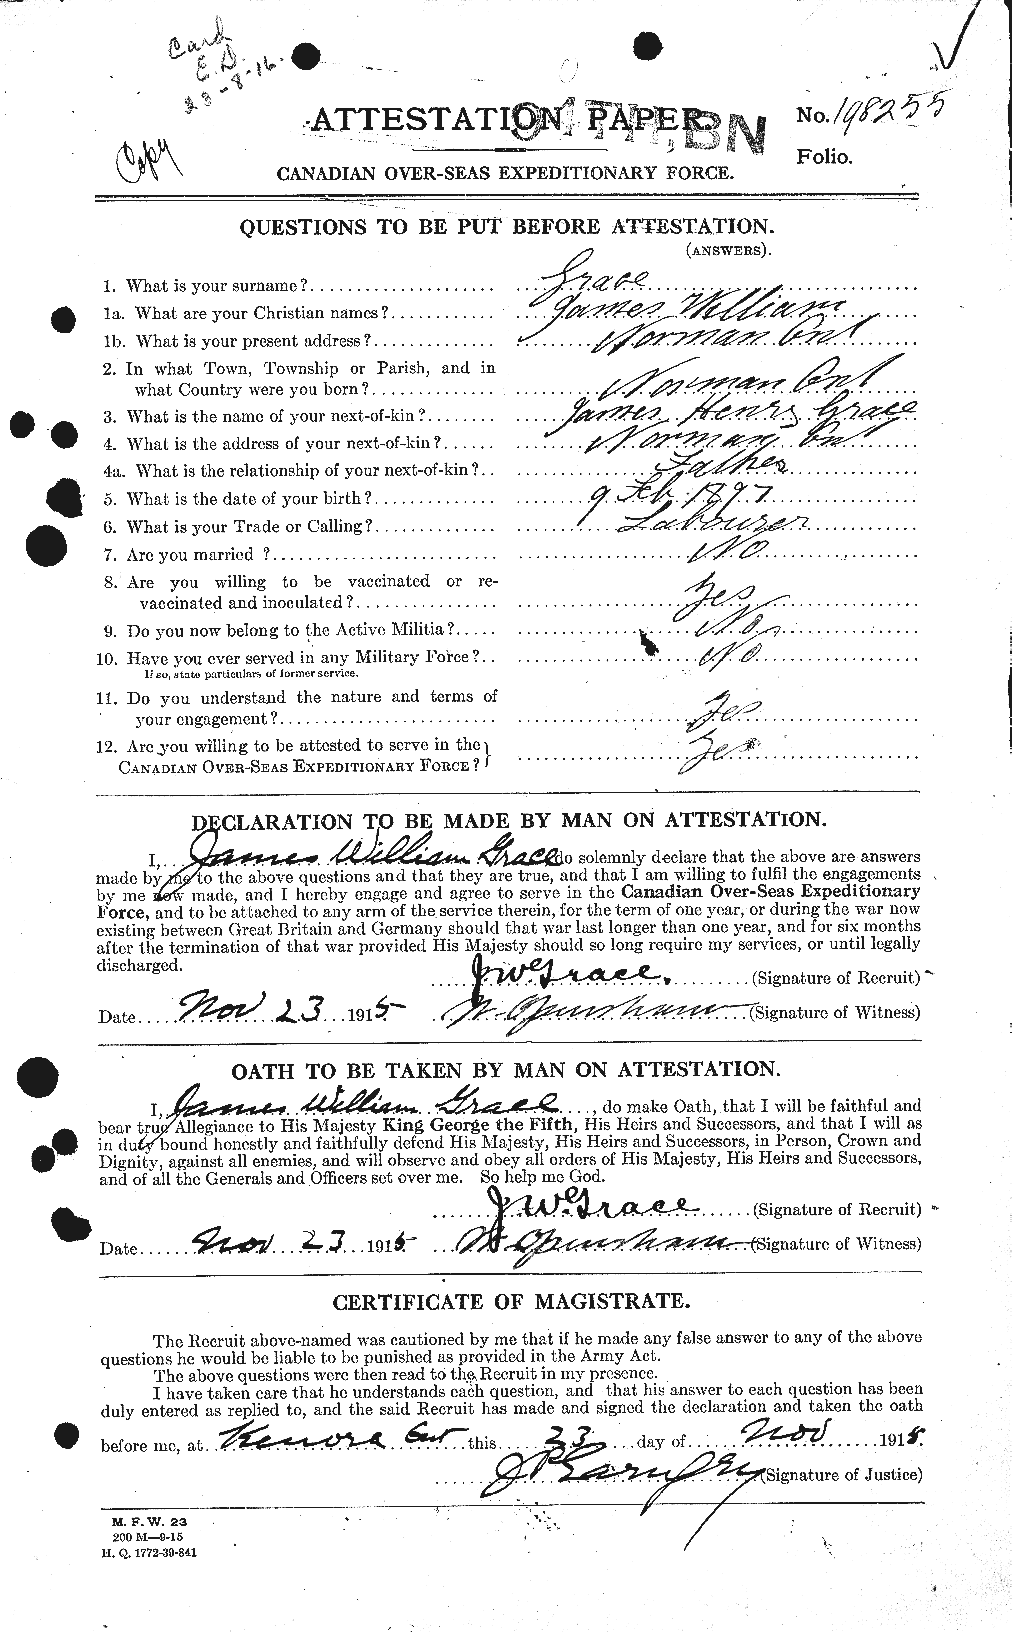 Personnel Records of the First World War - CEF 357404a